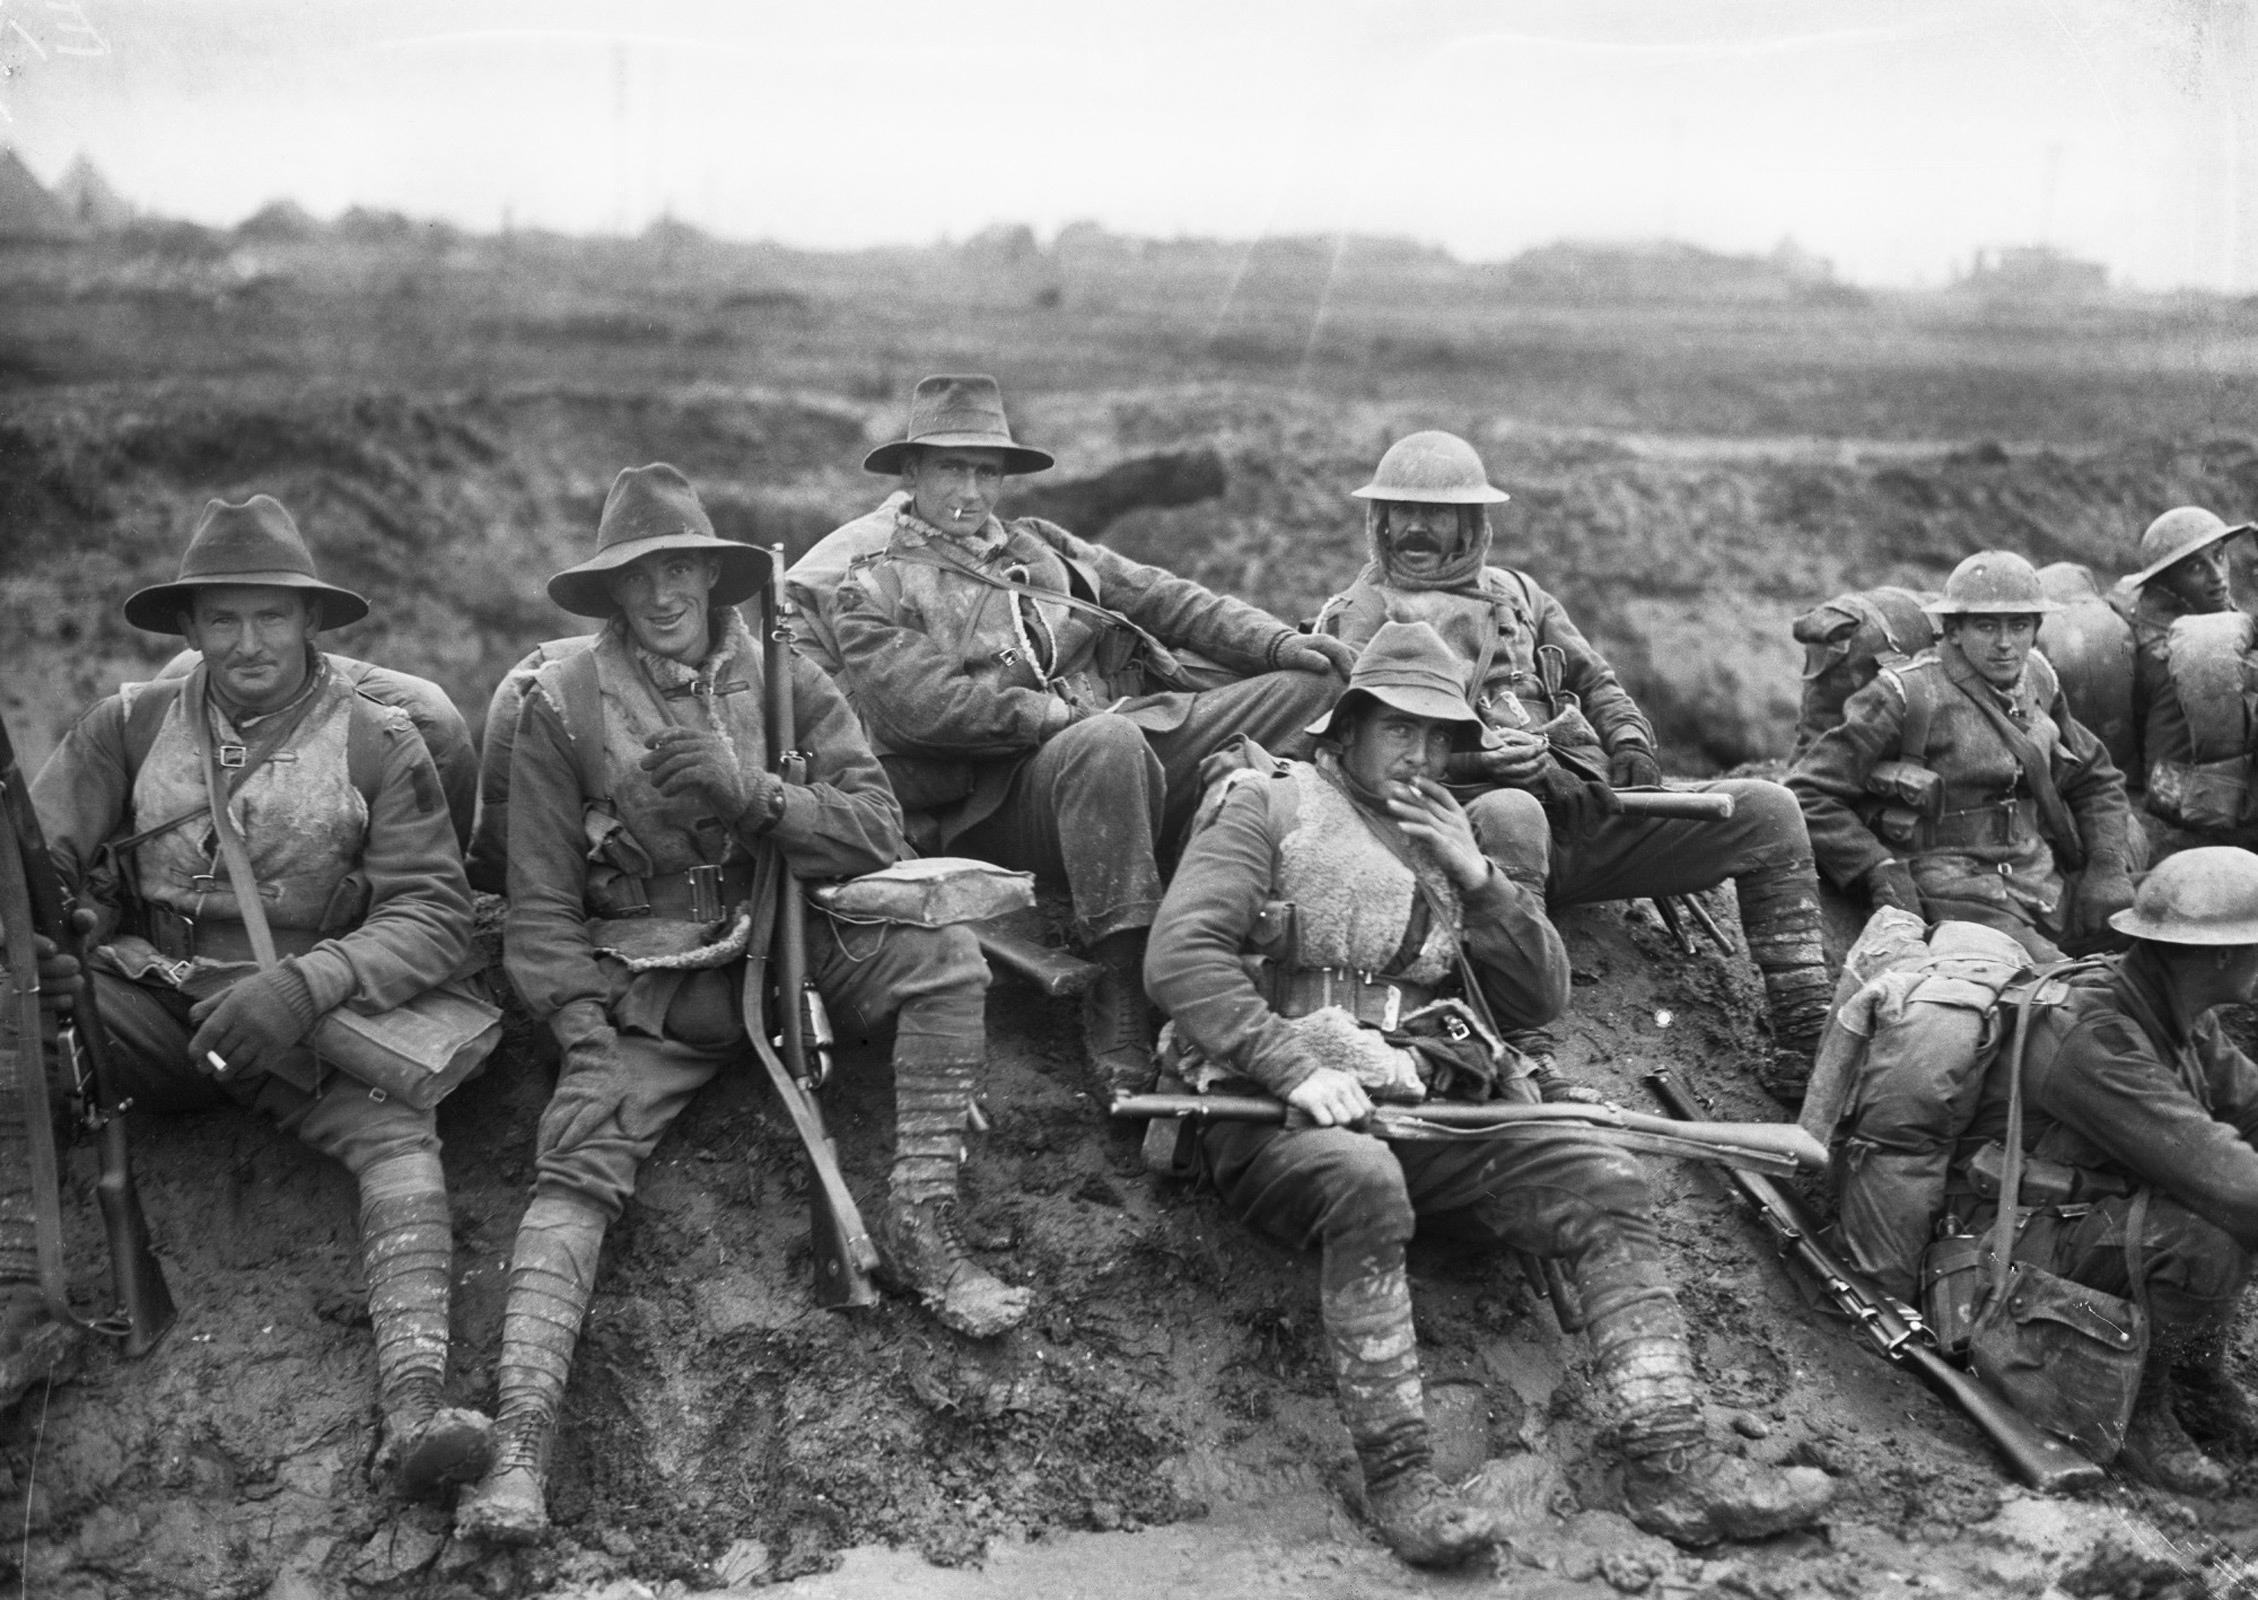 Unidentified men of the 5th Division resting by the side of the Montauban road, near Mametz, while enroute to the trenches, December 1916